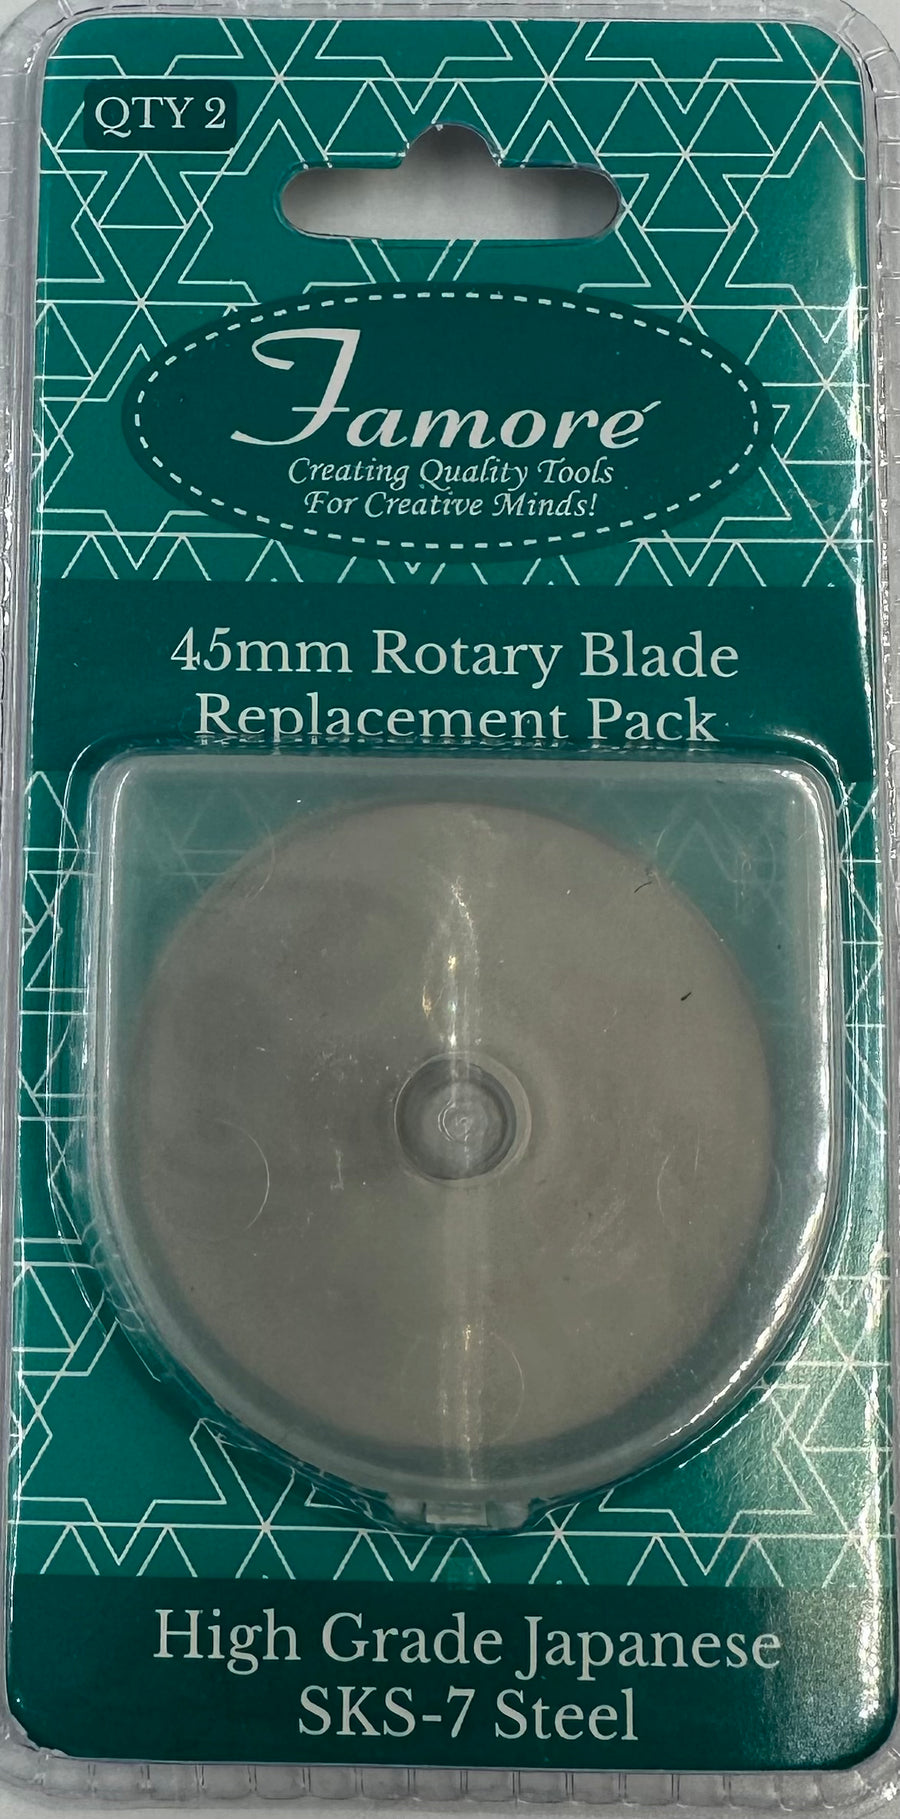 Famoré 45mm Rotary Cutter Replacement Blades